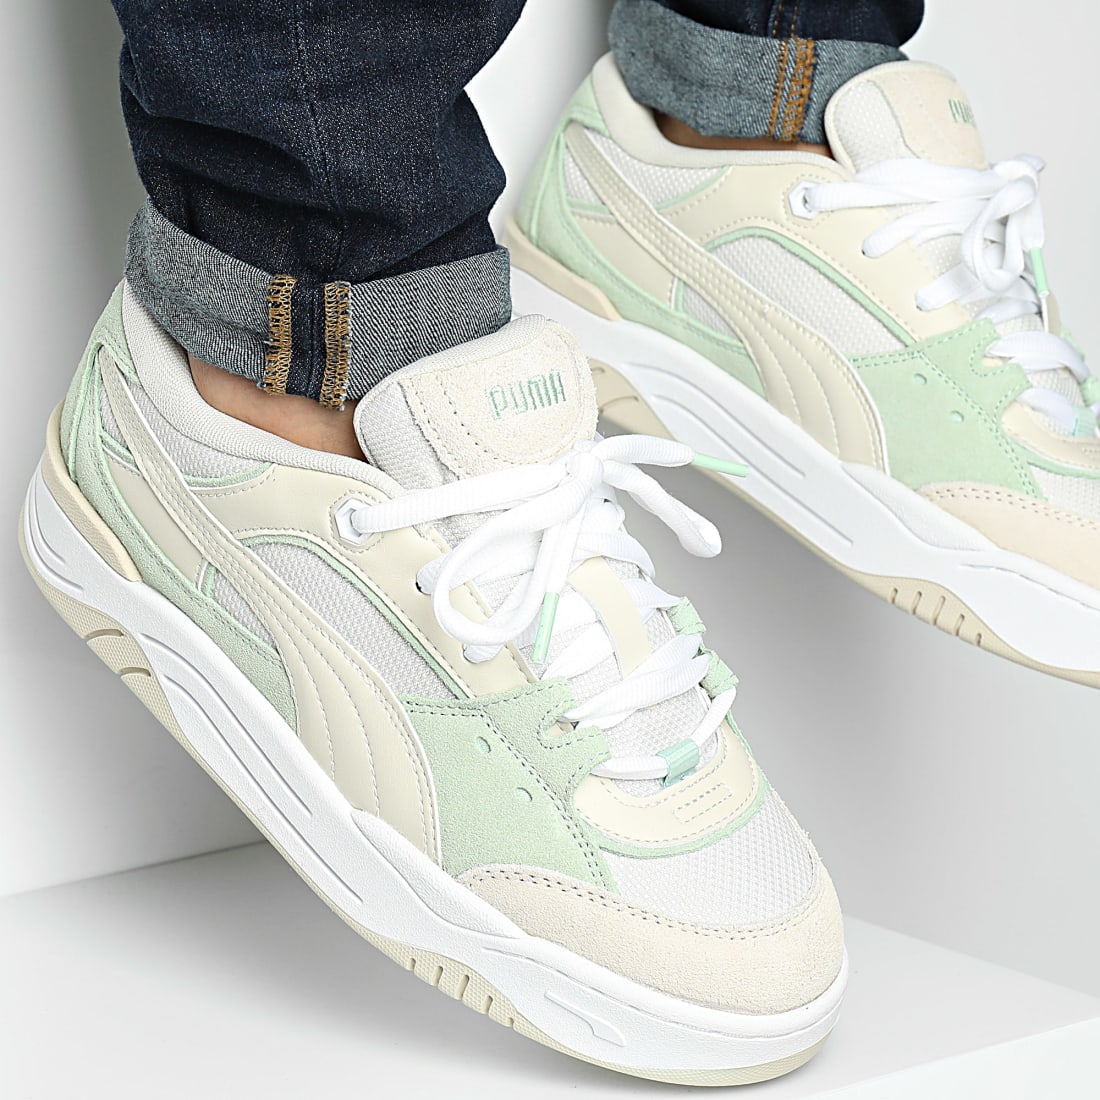 PUMA 180 - Frosted Ivory Fresh Mint